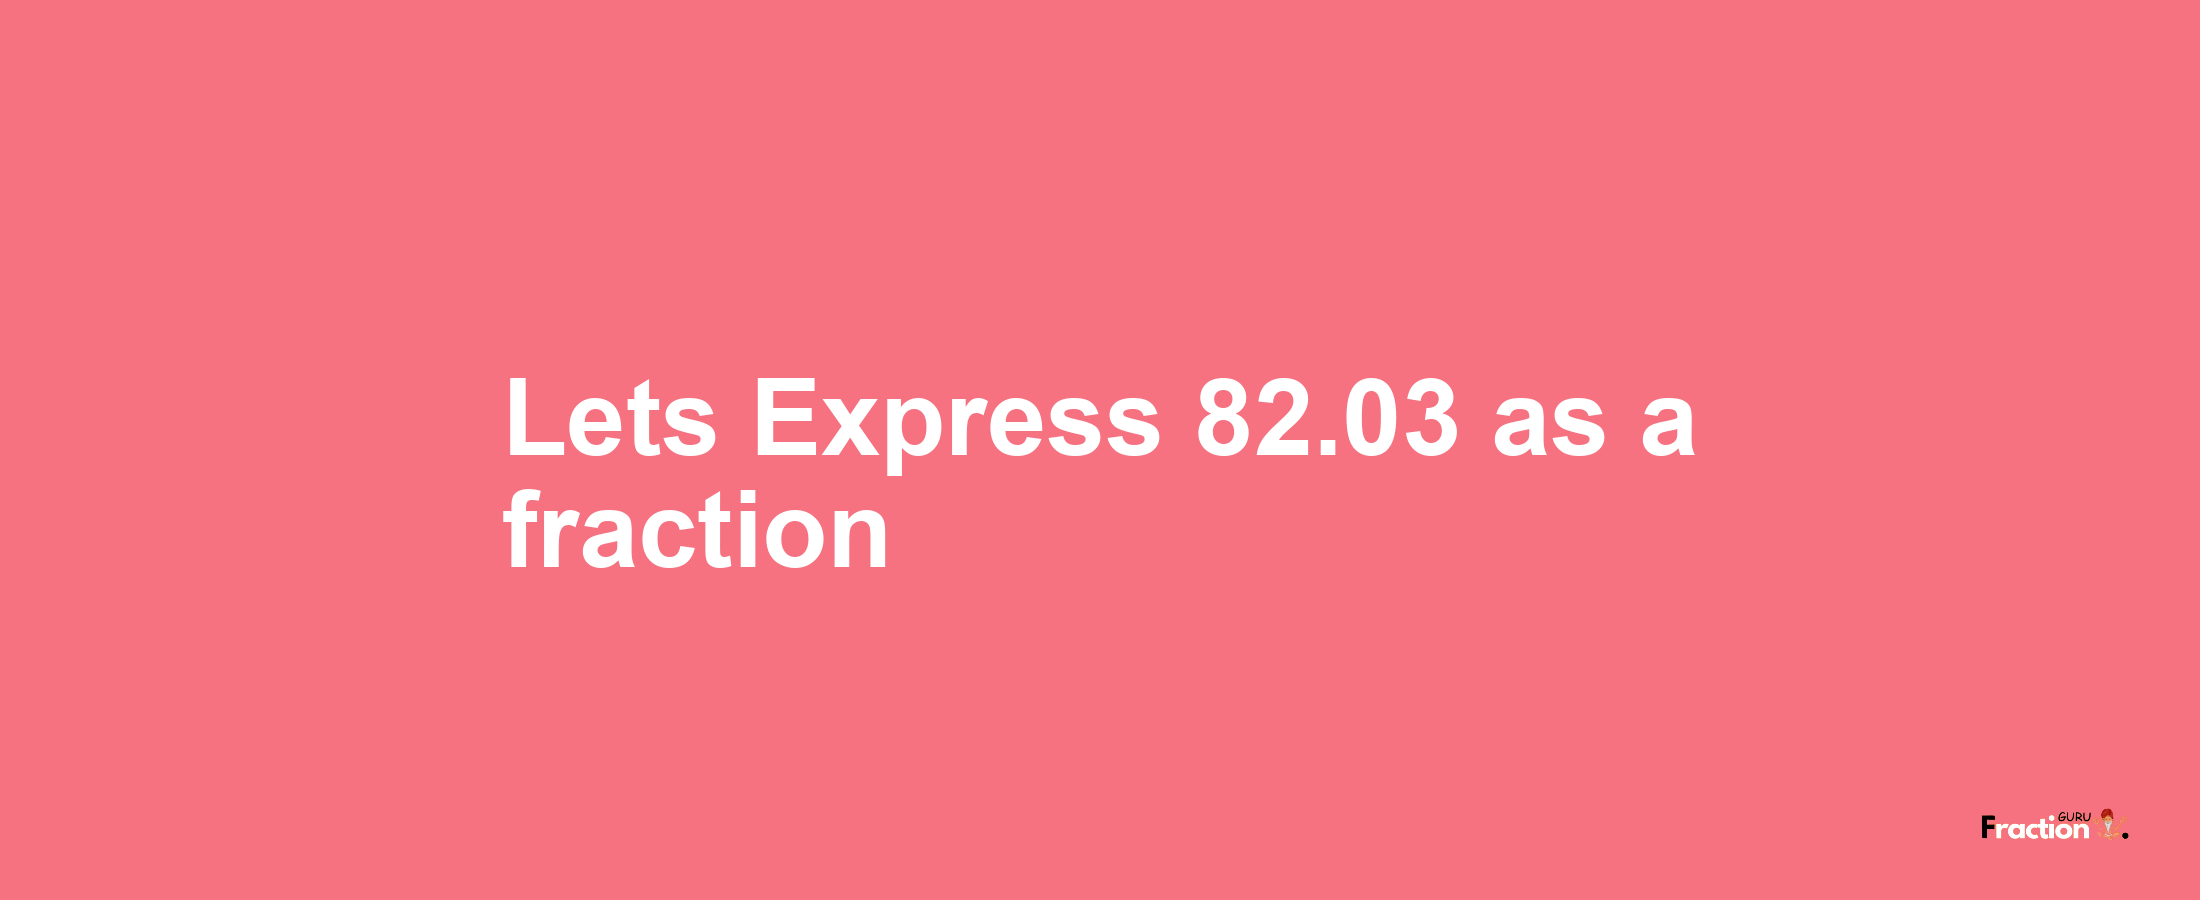 Lets Express 82.03 as afraction